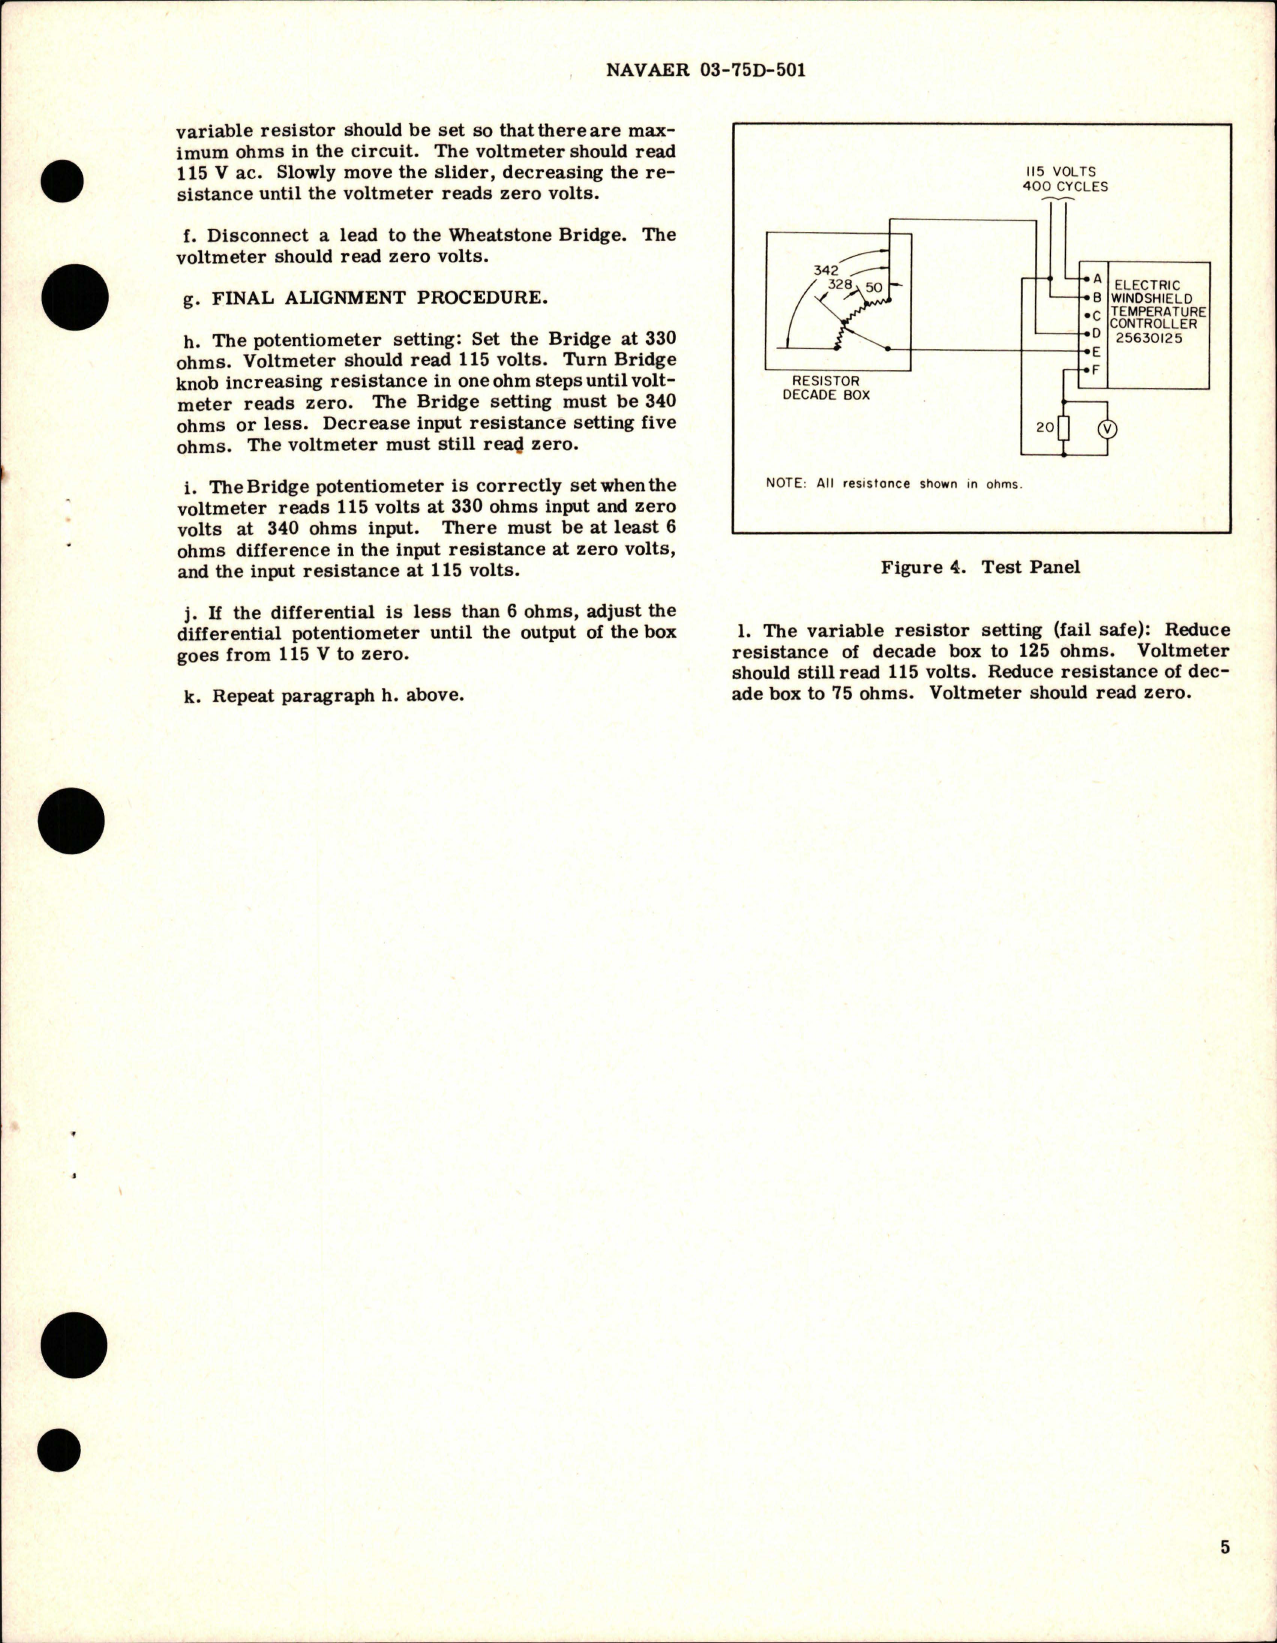 Sample page 5 from AirCorps Library document: Overhaul Instructions with Parts Breakdown for Windshield Temperature Controller - 25630125